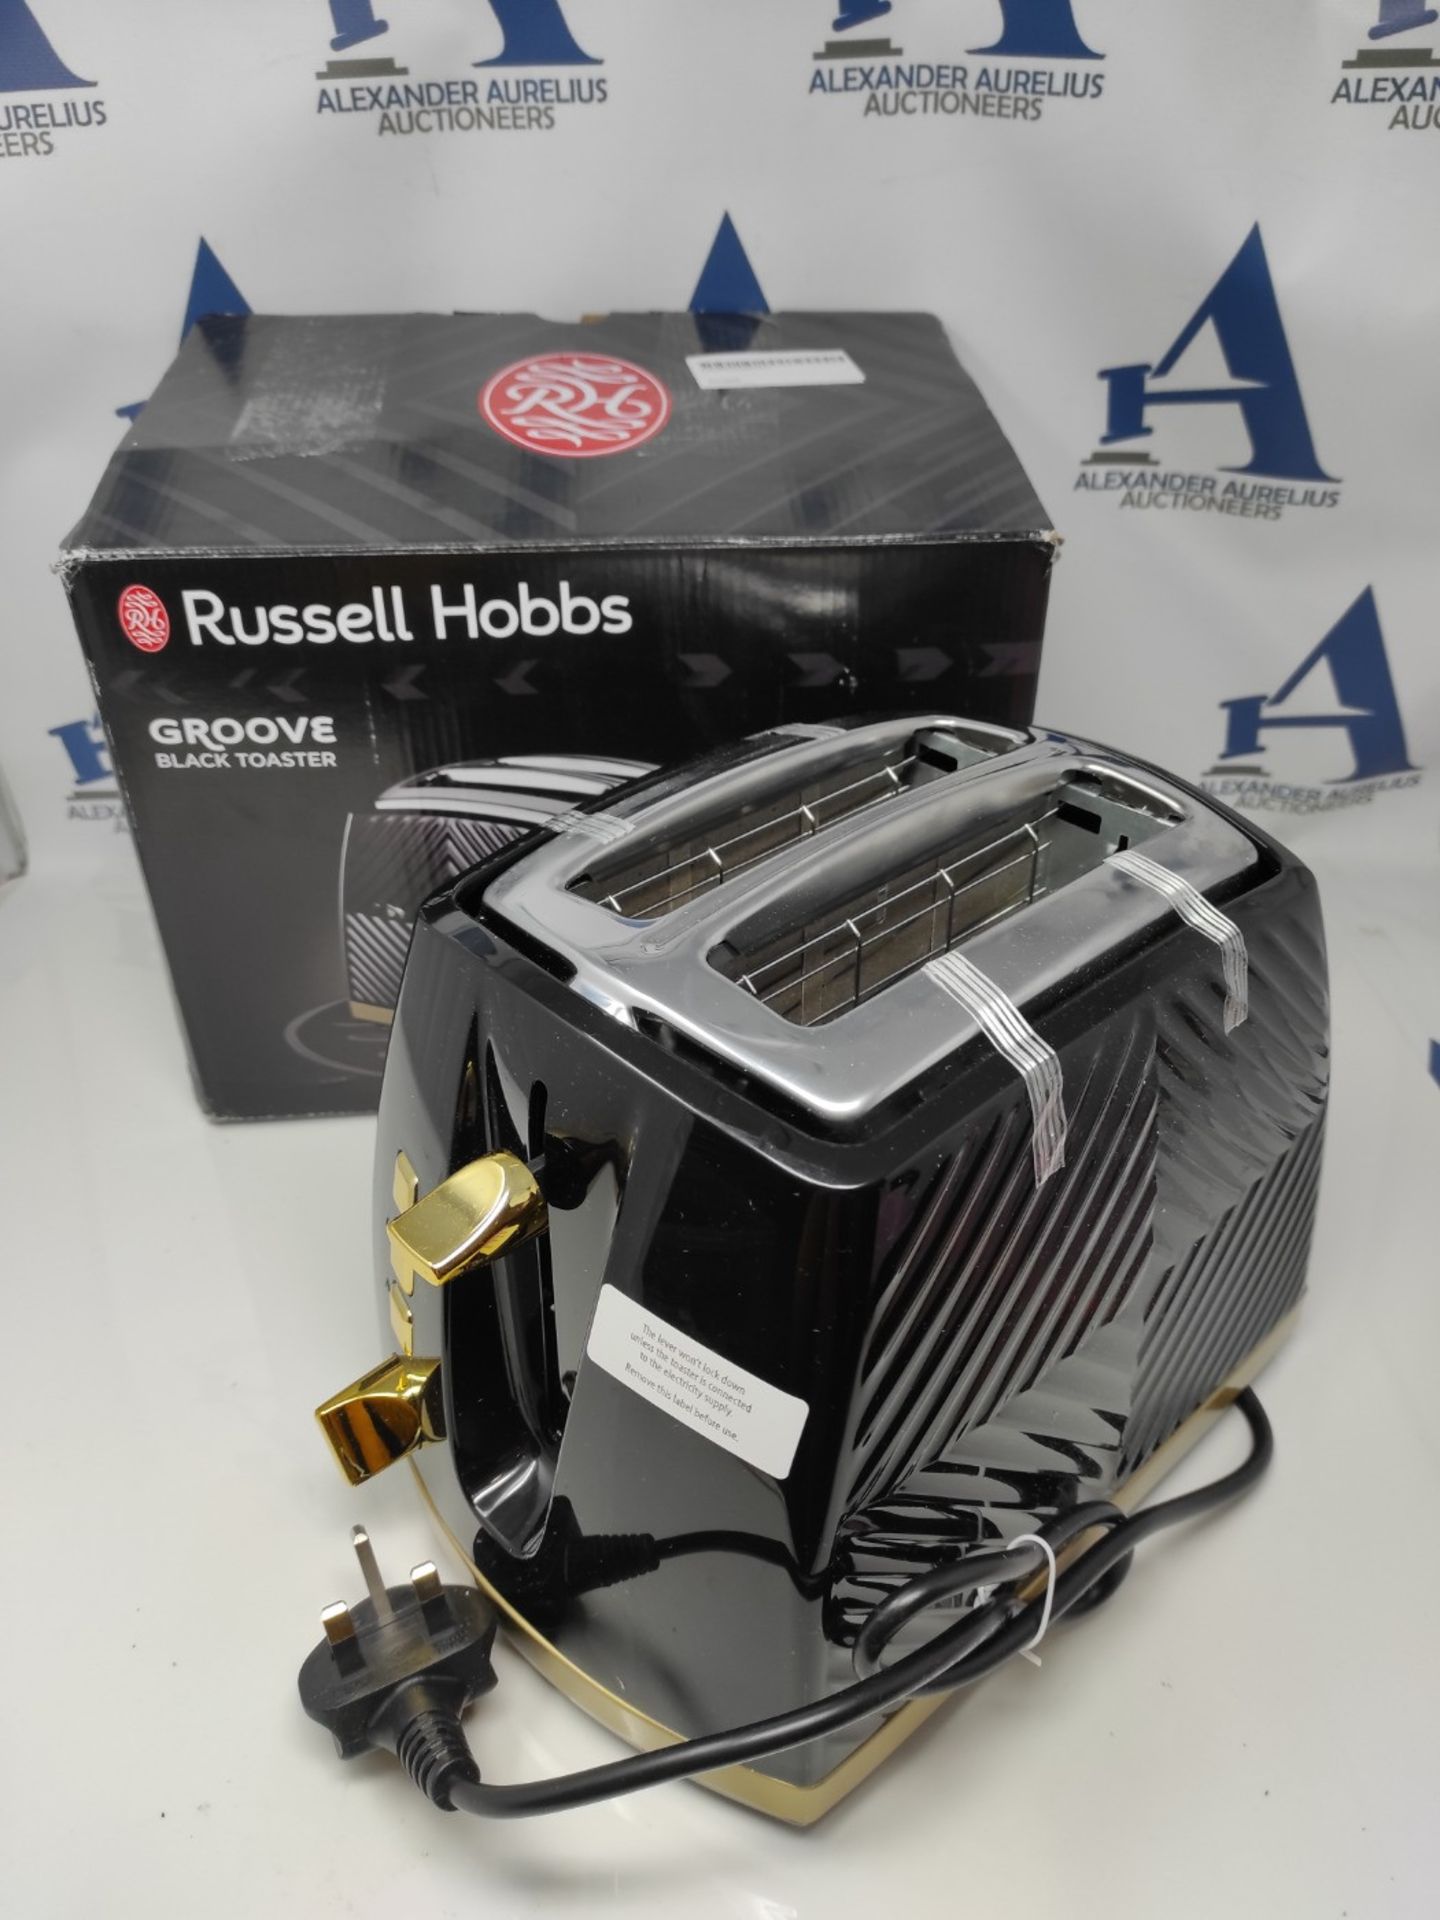 Russell Hobbs 26390 Groove 2 Slice Toaster, Tactile 3D Design Bread Toaster with Froze - Image 2 of 2